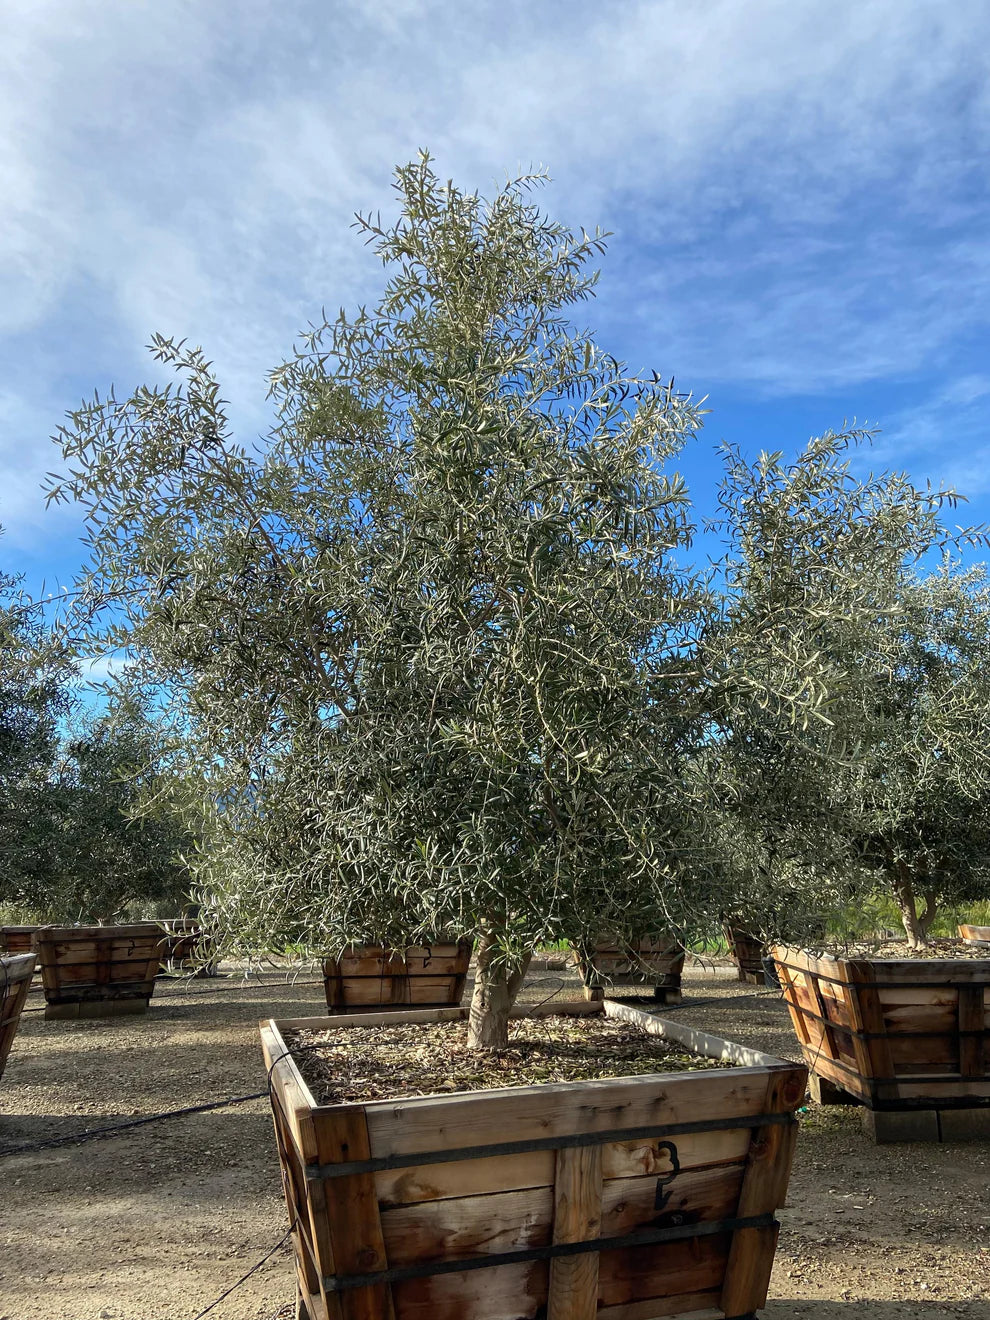 Where Can I Buy an Olive Tree Online?